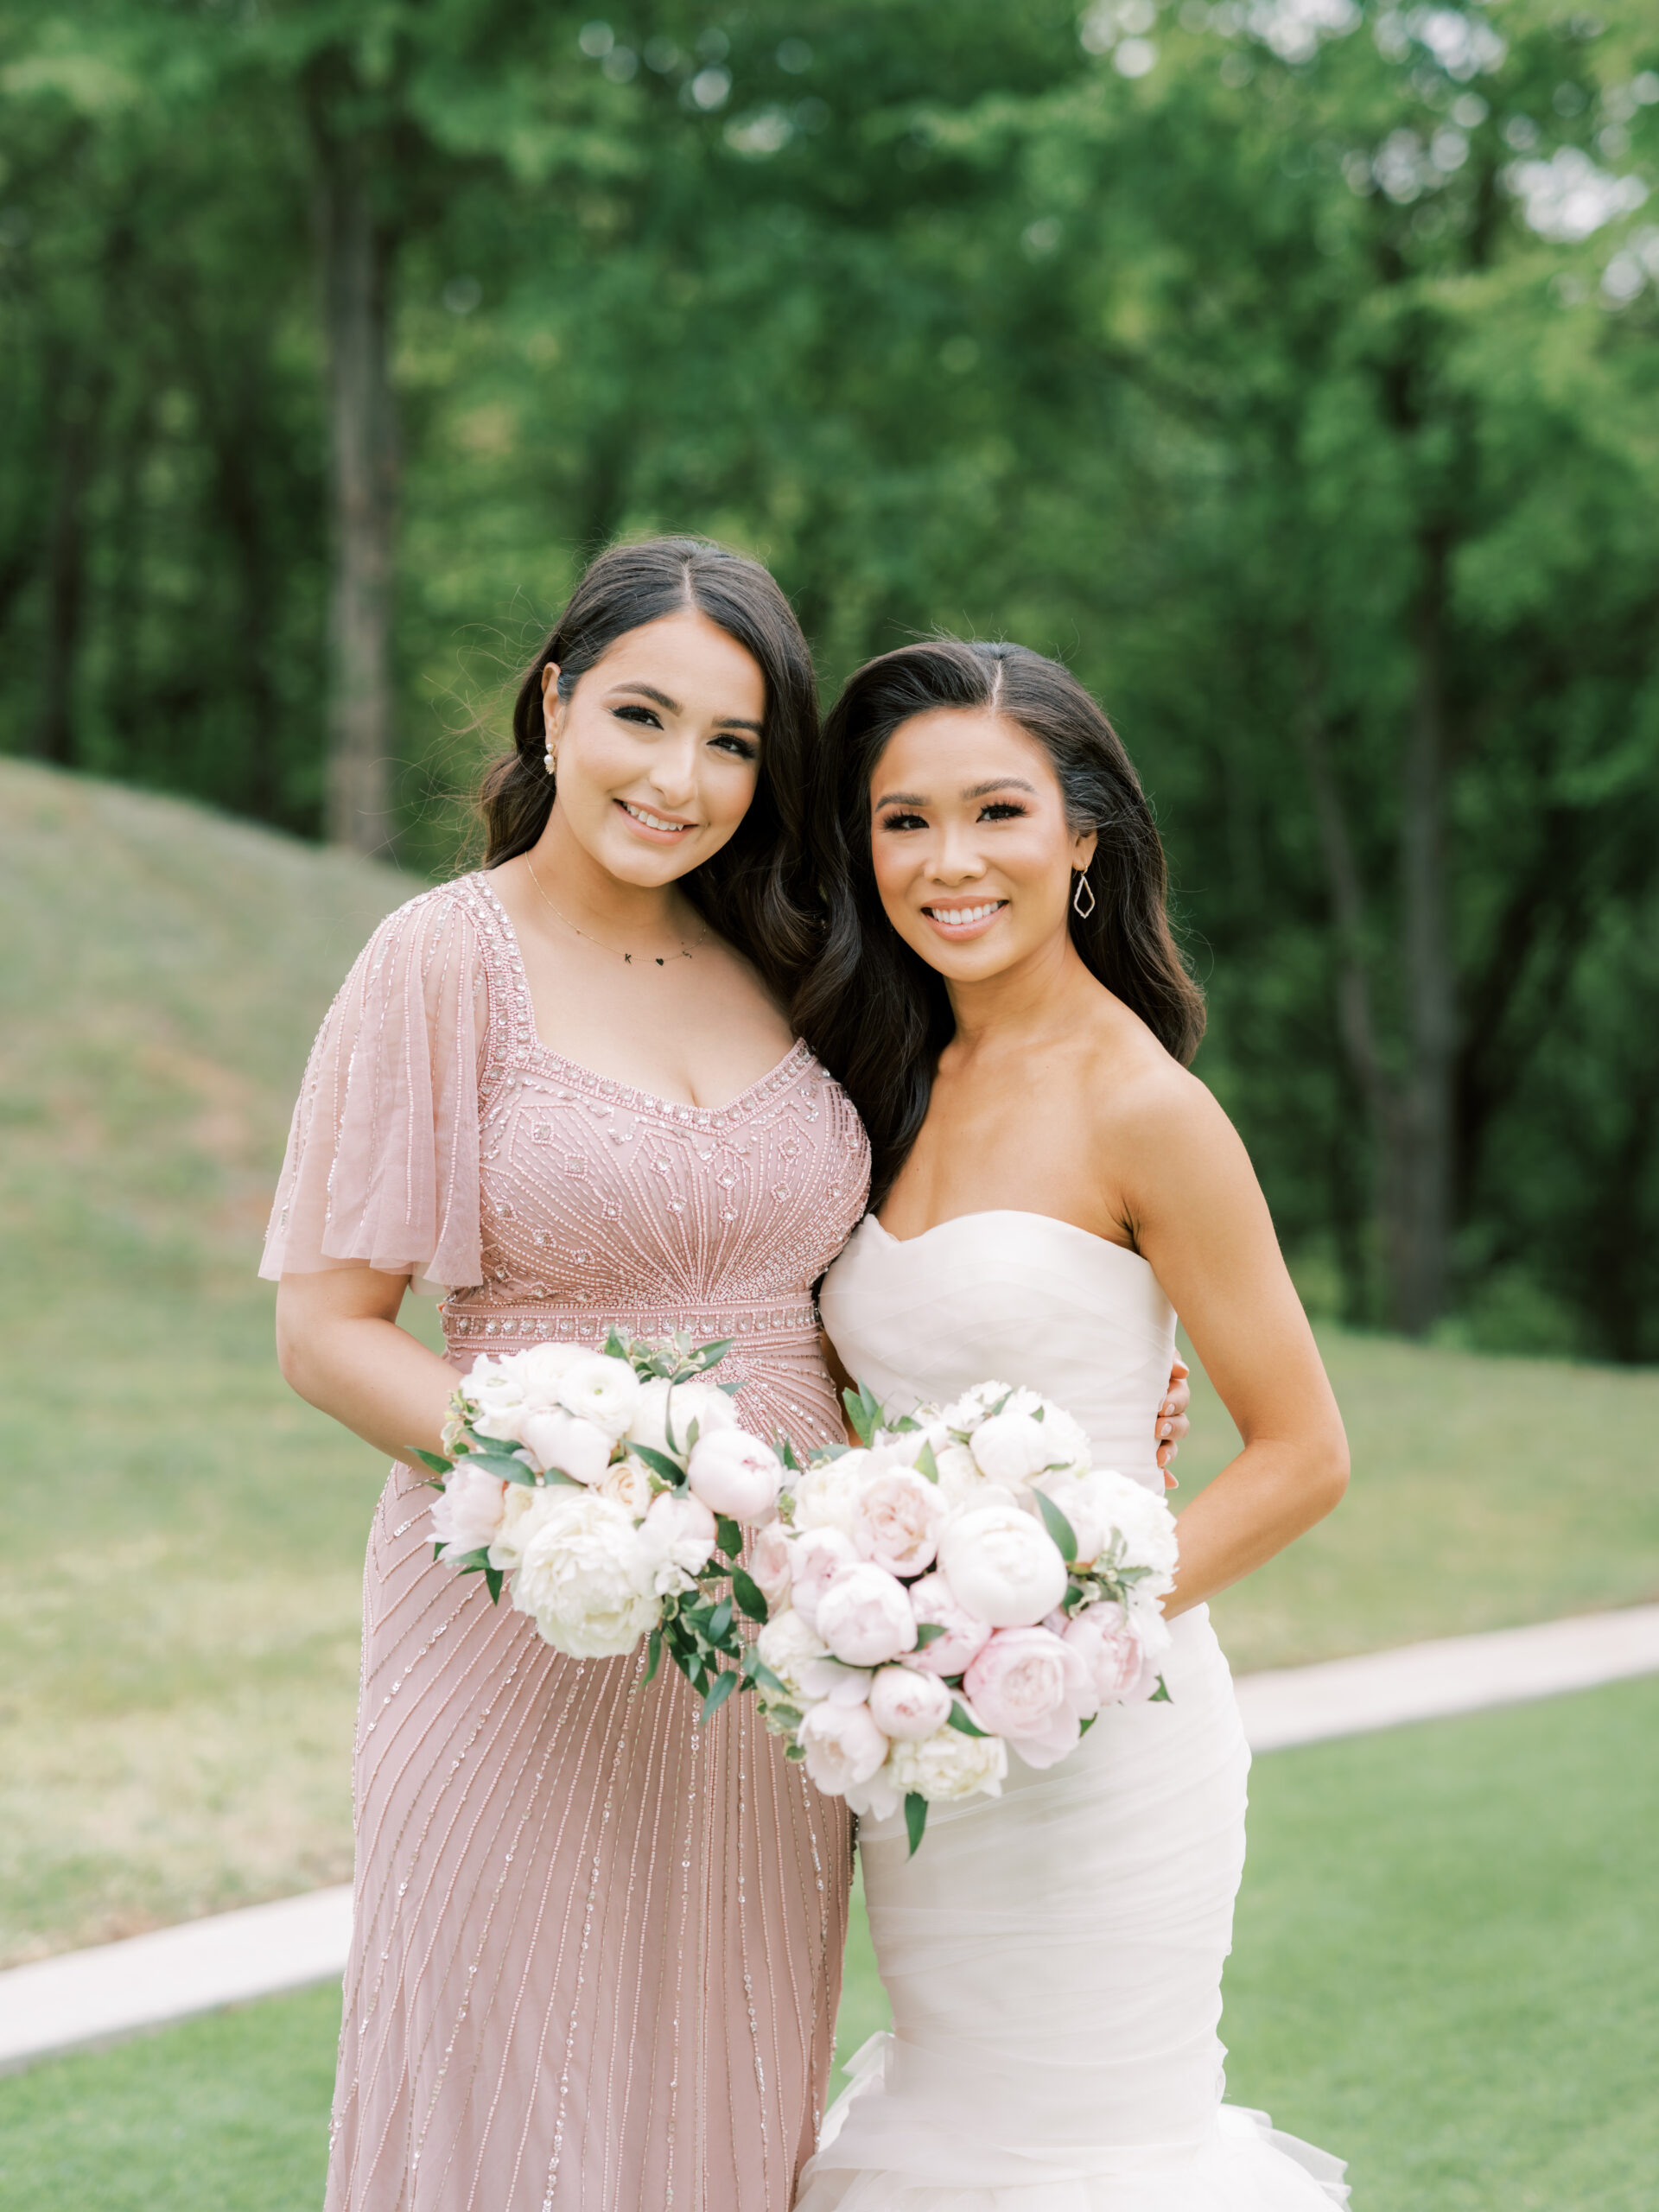 Hoang-Kim wearing a Vera Wang Gemma mermaid gown with her bridesmaid wearing an Adriana Papell hand-beaded flutter sleeve blush pink gown